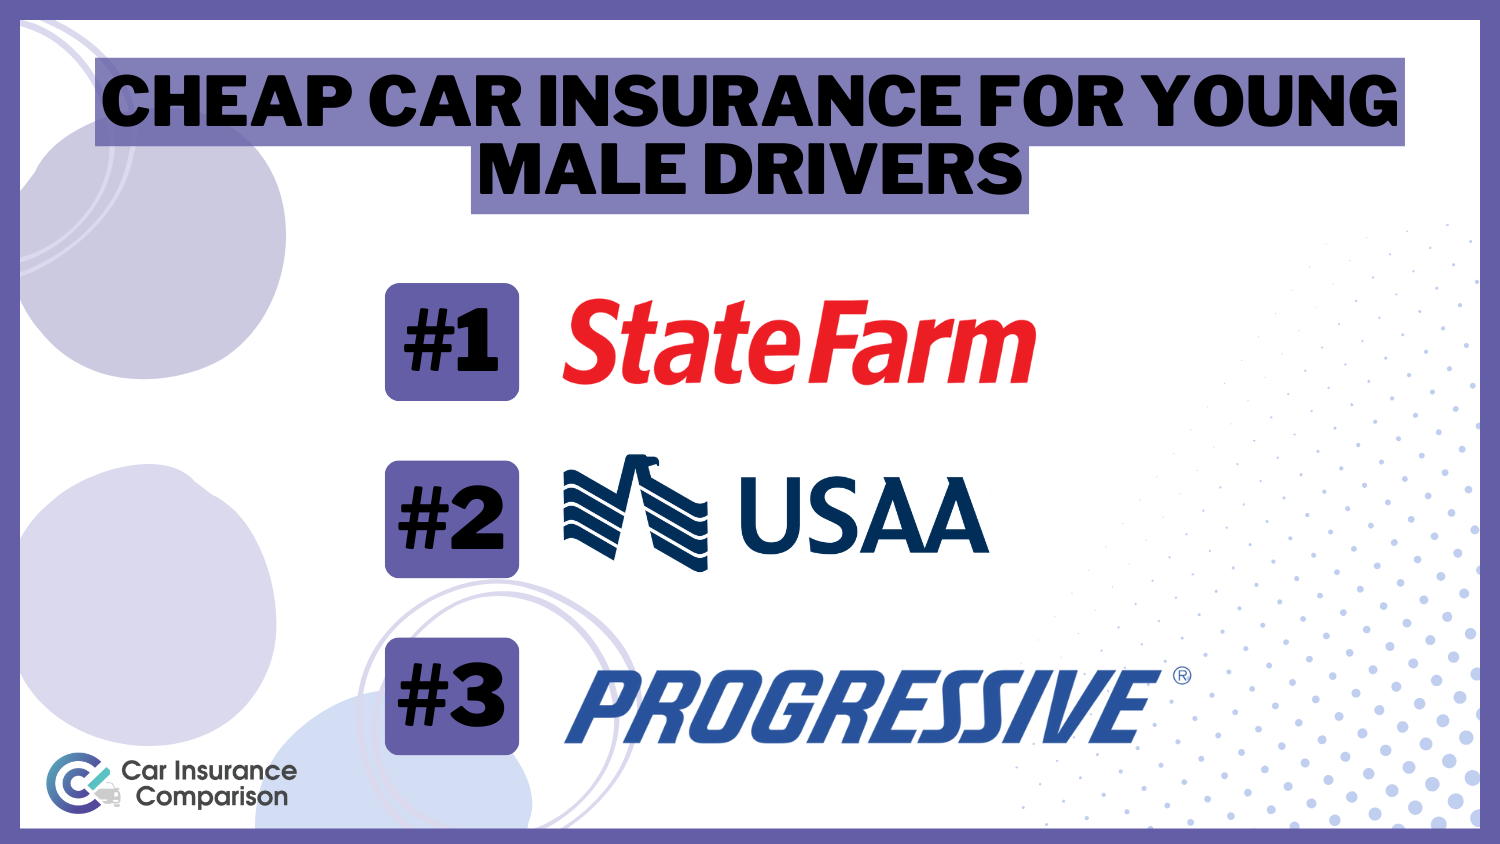 Cheap Car Insurance for Young Male Drivers: State Farm, USAA, and Progressive